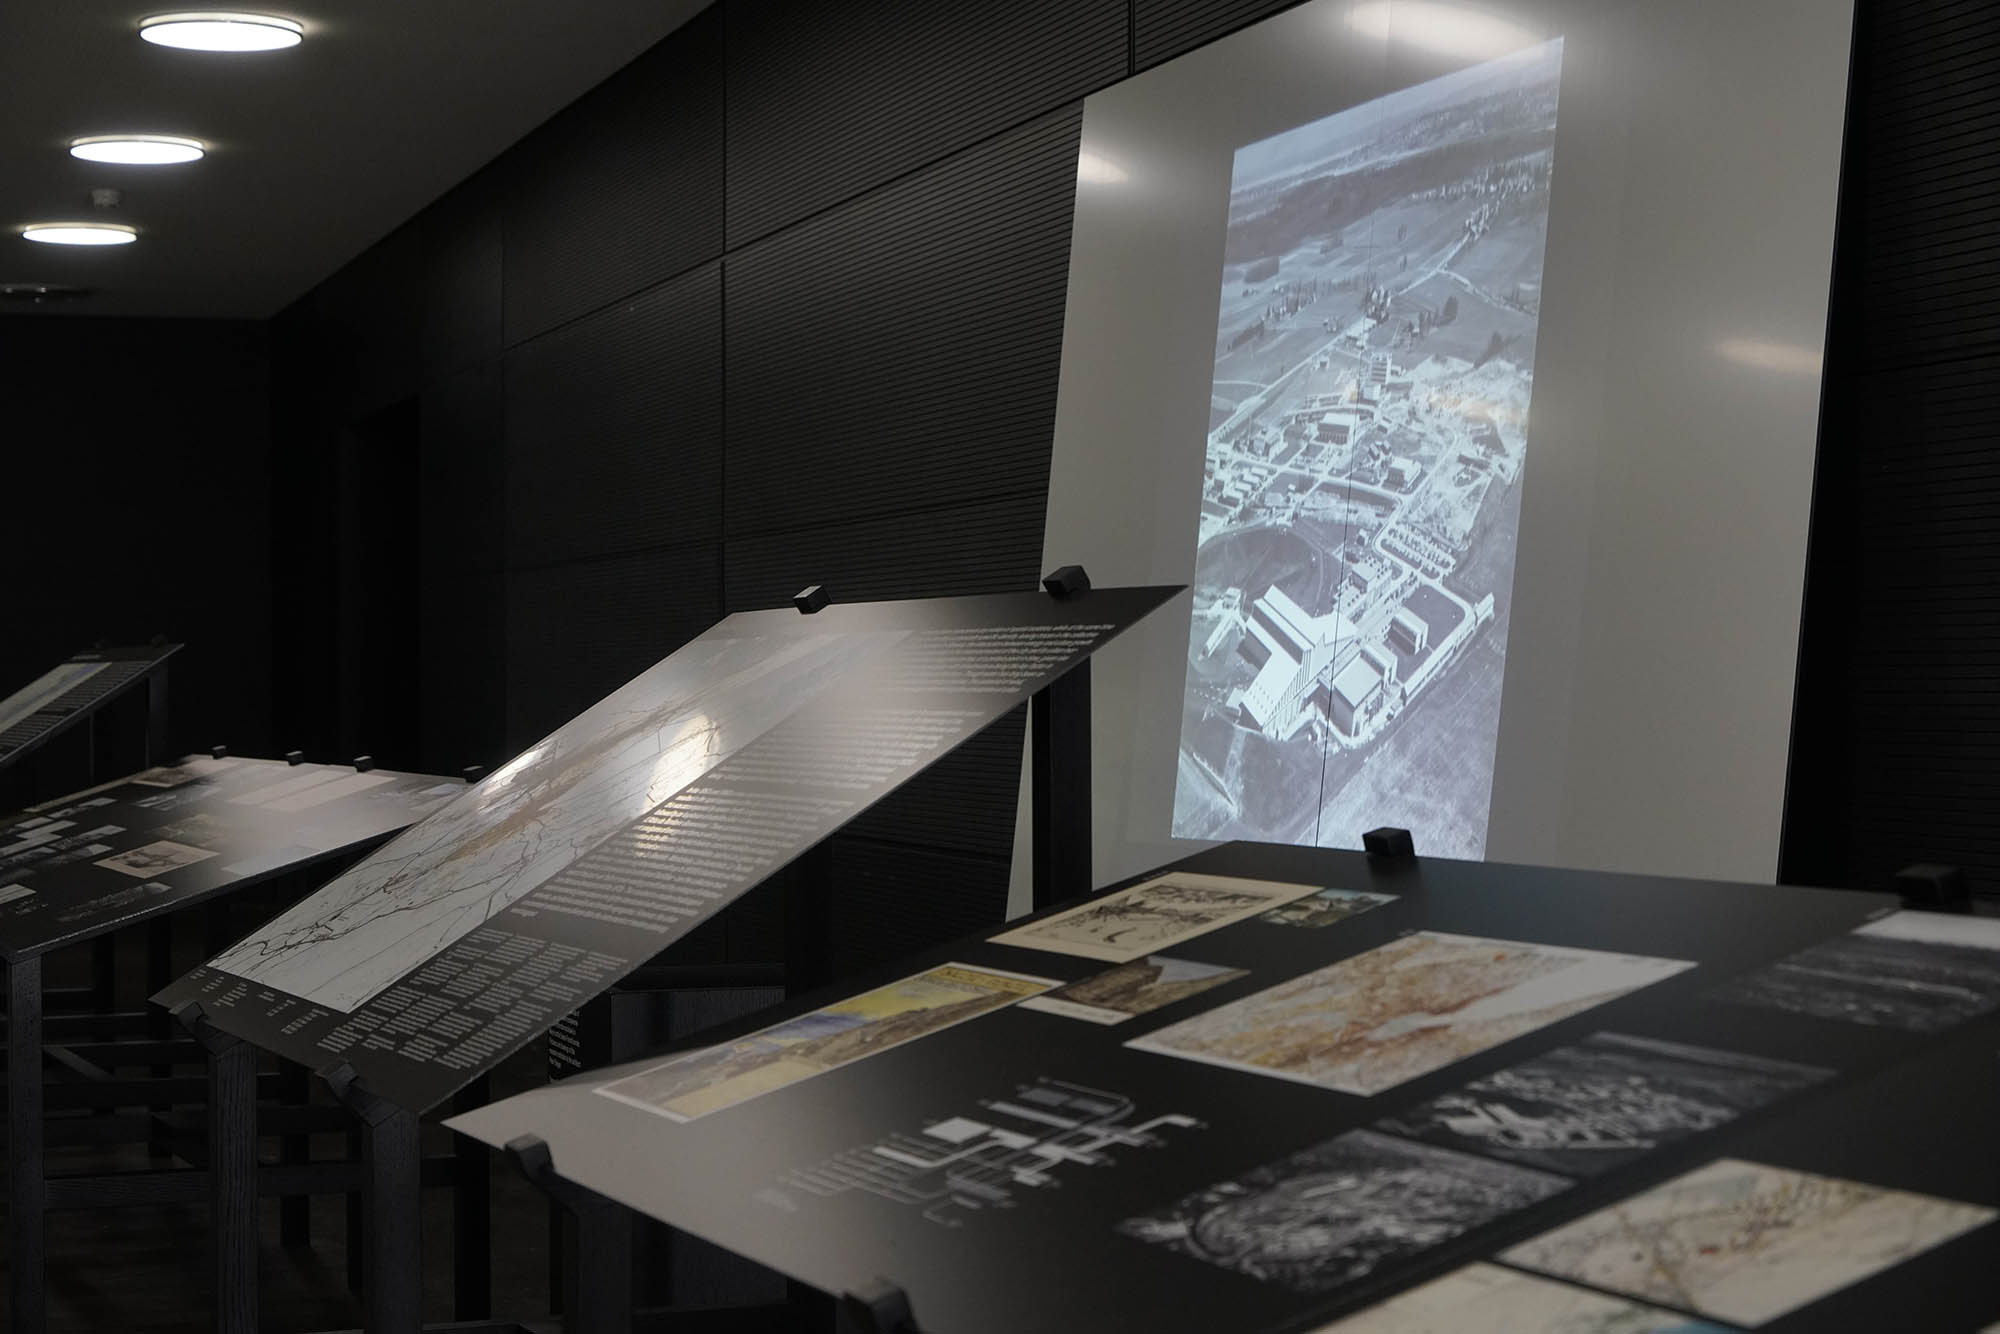 The City as Energy Landscape, exhibition curated by Sascha Roesler and Lorenzo Stieger, Accademia di architettura, Mendrisio (Switzerland), Sep. 14-Oct. 31, 2020. Photo: Katja Jug